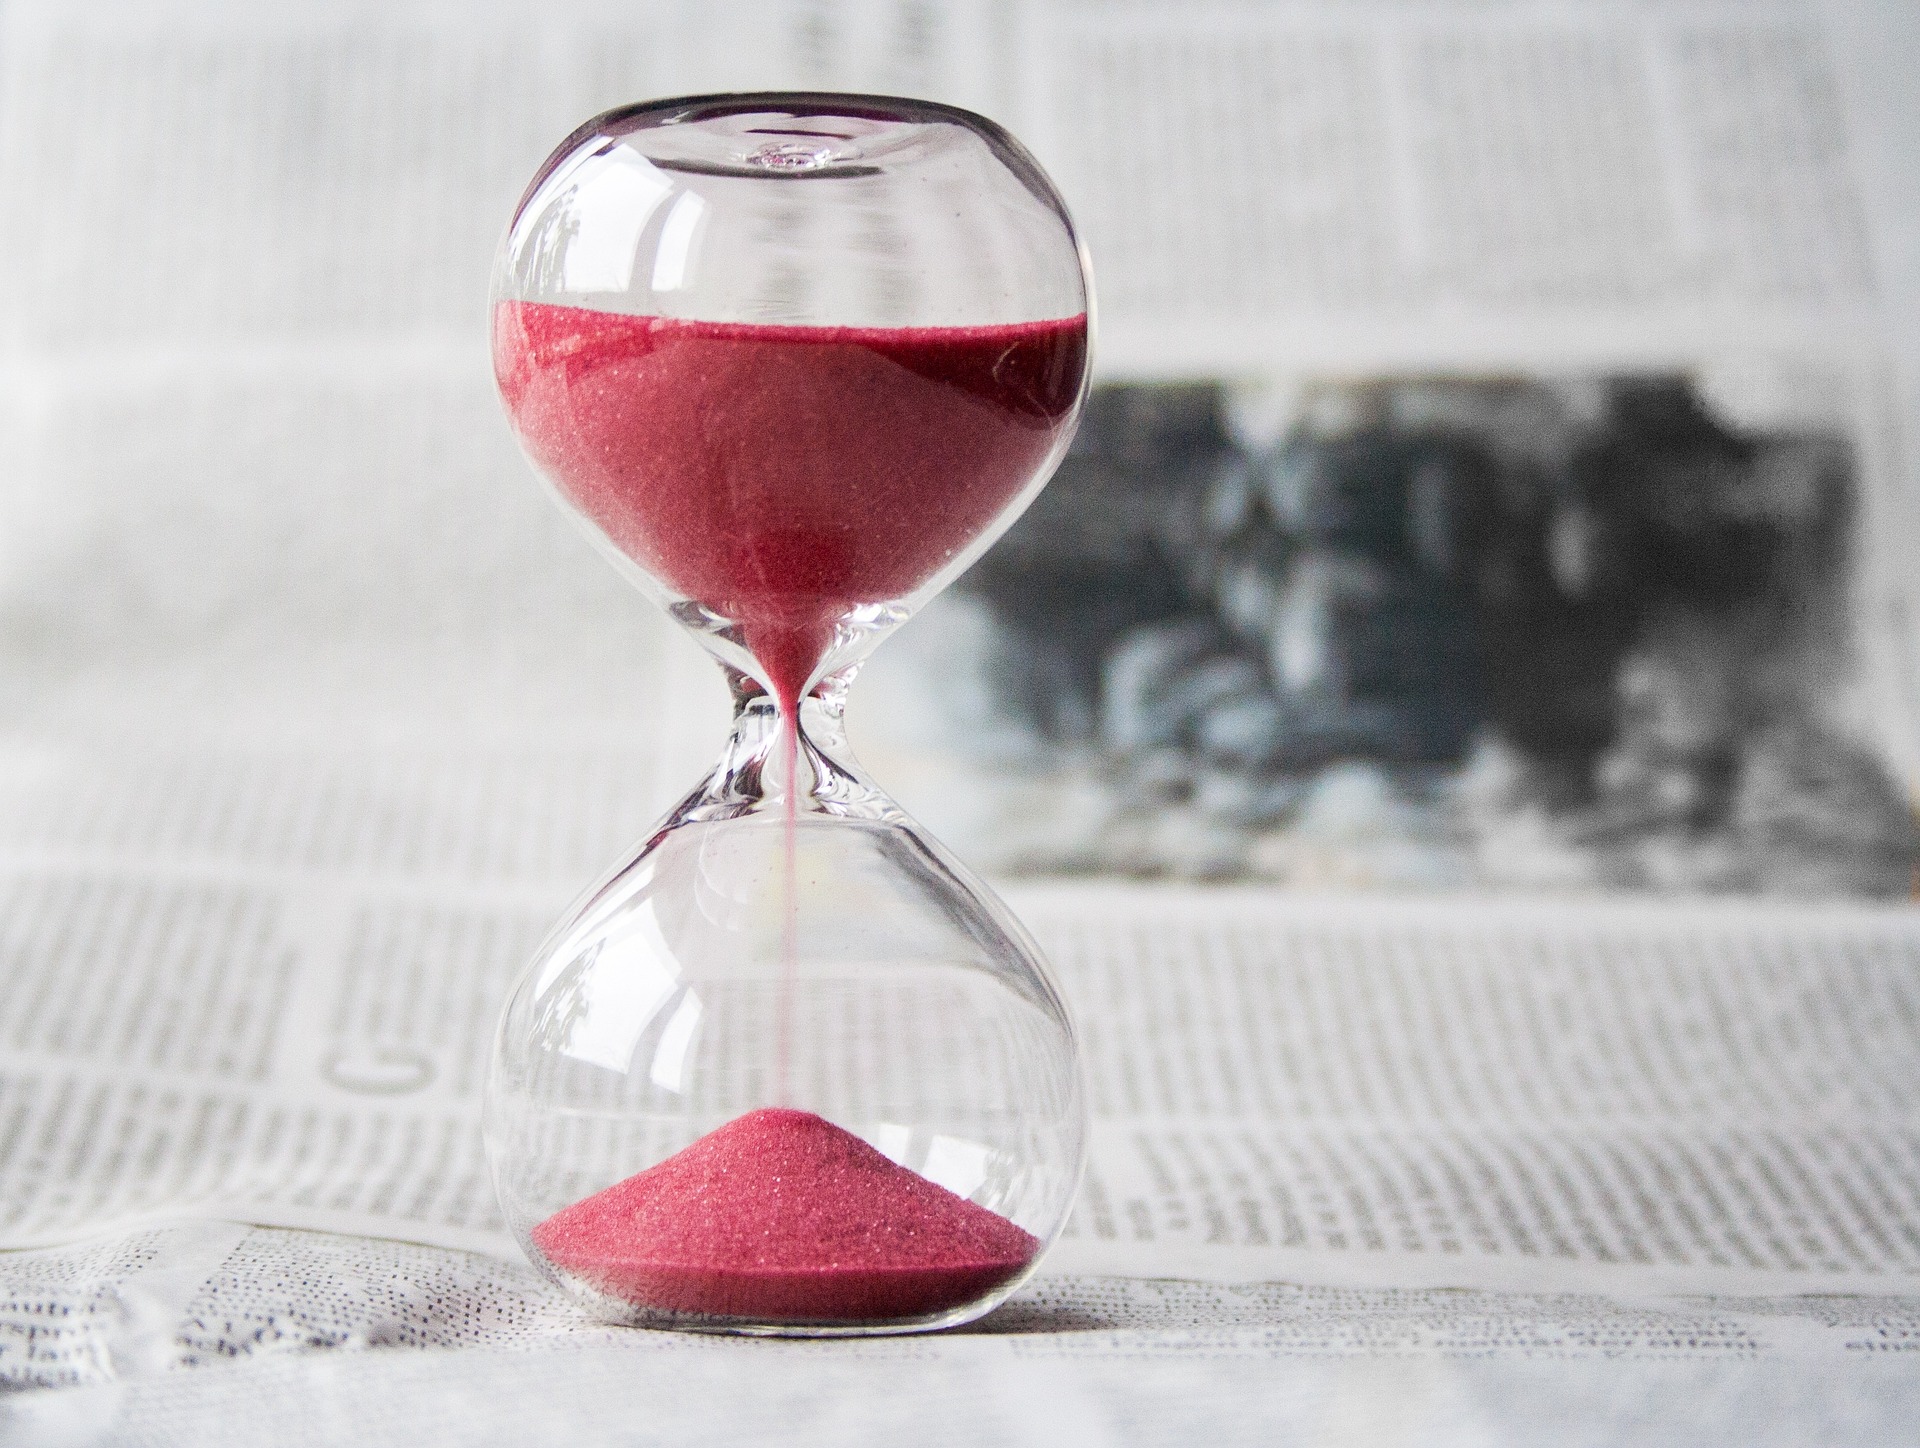 An hourglass with red sand, partially running; our No Win No Fee Solicitors discuss injury compensation claim limitation periods.